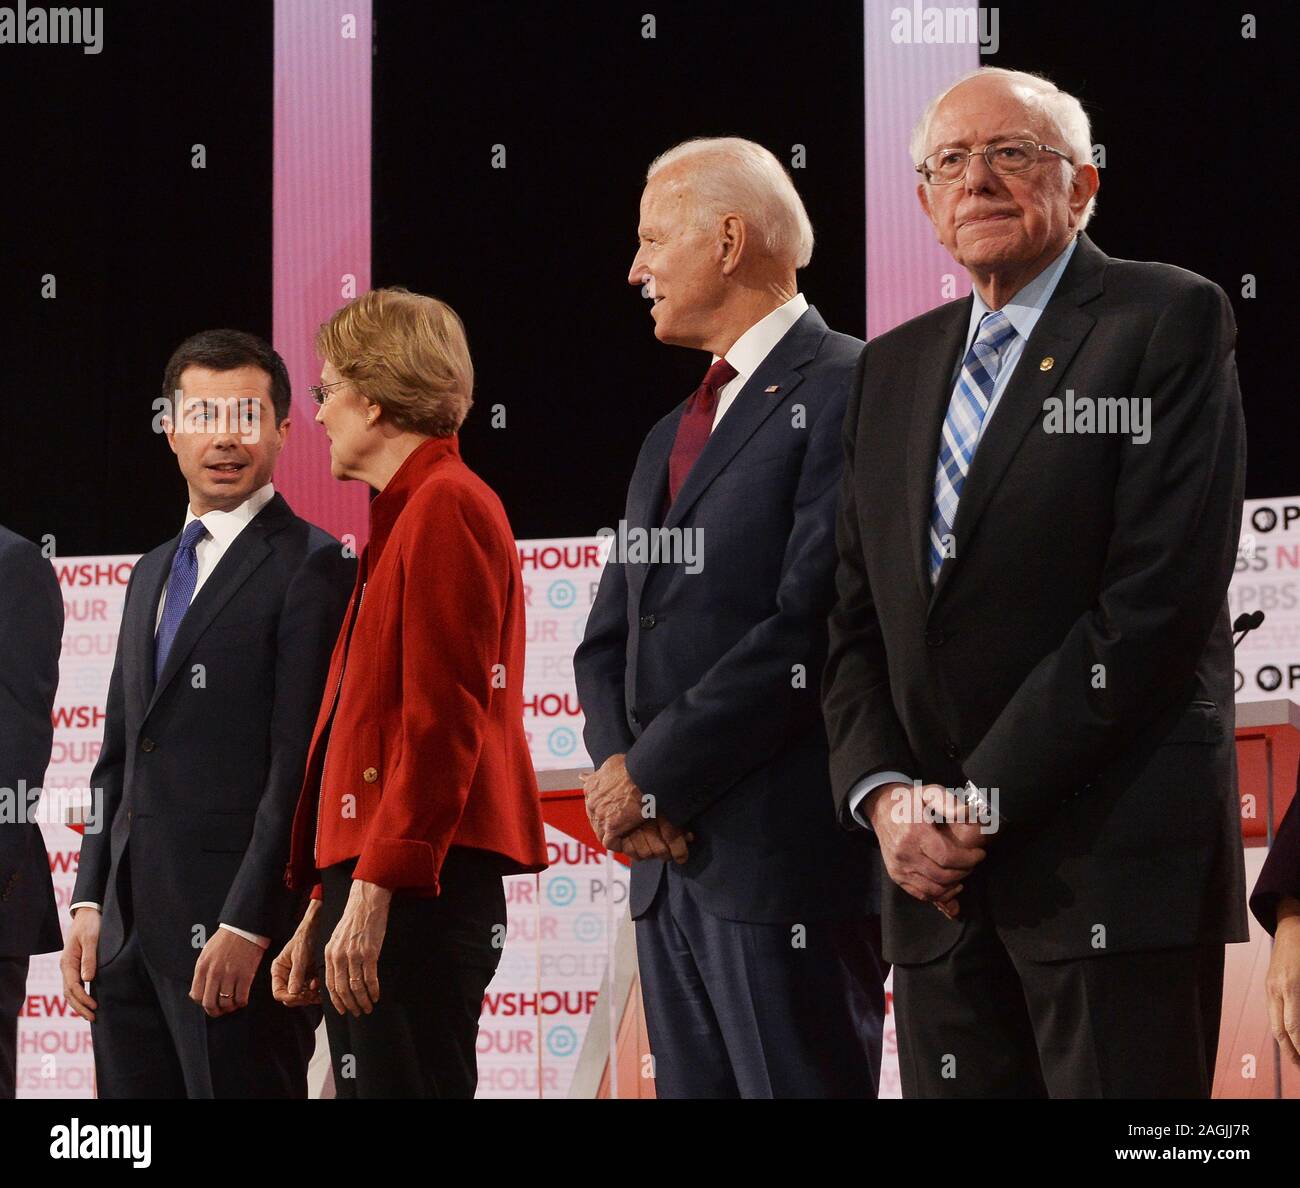 Los Angeles, United States. 19th Dec, 2019. Candidates take the stage for the sixth Democratic presidential debate at Loyola Marymount University on Thursday, December 19, 2019 in Los Angeles. South Bend, Ind., Mayor Pete Buttigieg, Massachusetts Sen. Elizabeth Warren, former Vice President Joe Biden and Vermont Sen. Bernie Sanders (L-R) are introduced prior to the PBS Newshour and Politico co-hosted debate on Thursday, December 19, 2019. Photo by Jim RuymenUPI Credit: UPI/Alamy Live News Stock Photo